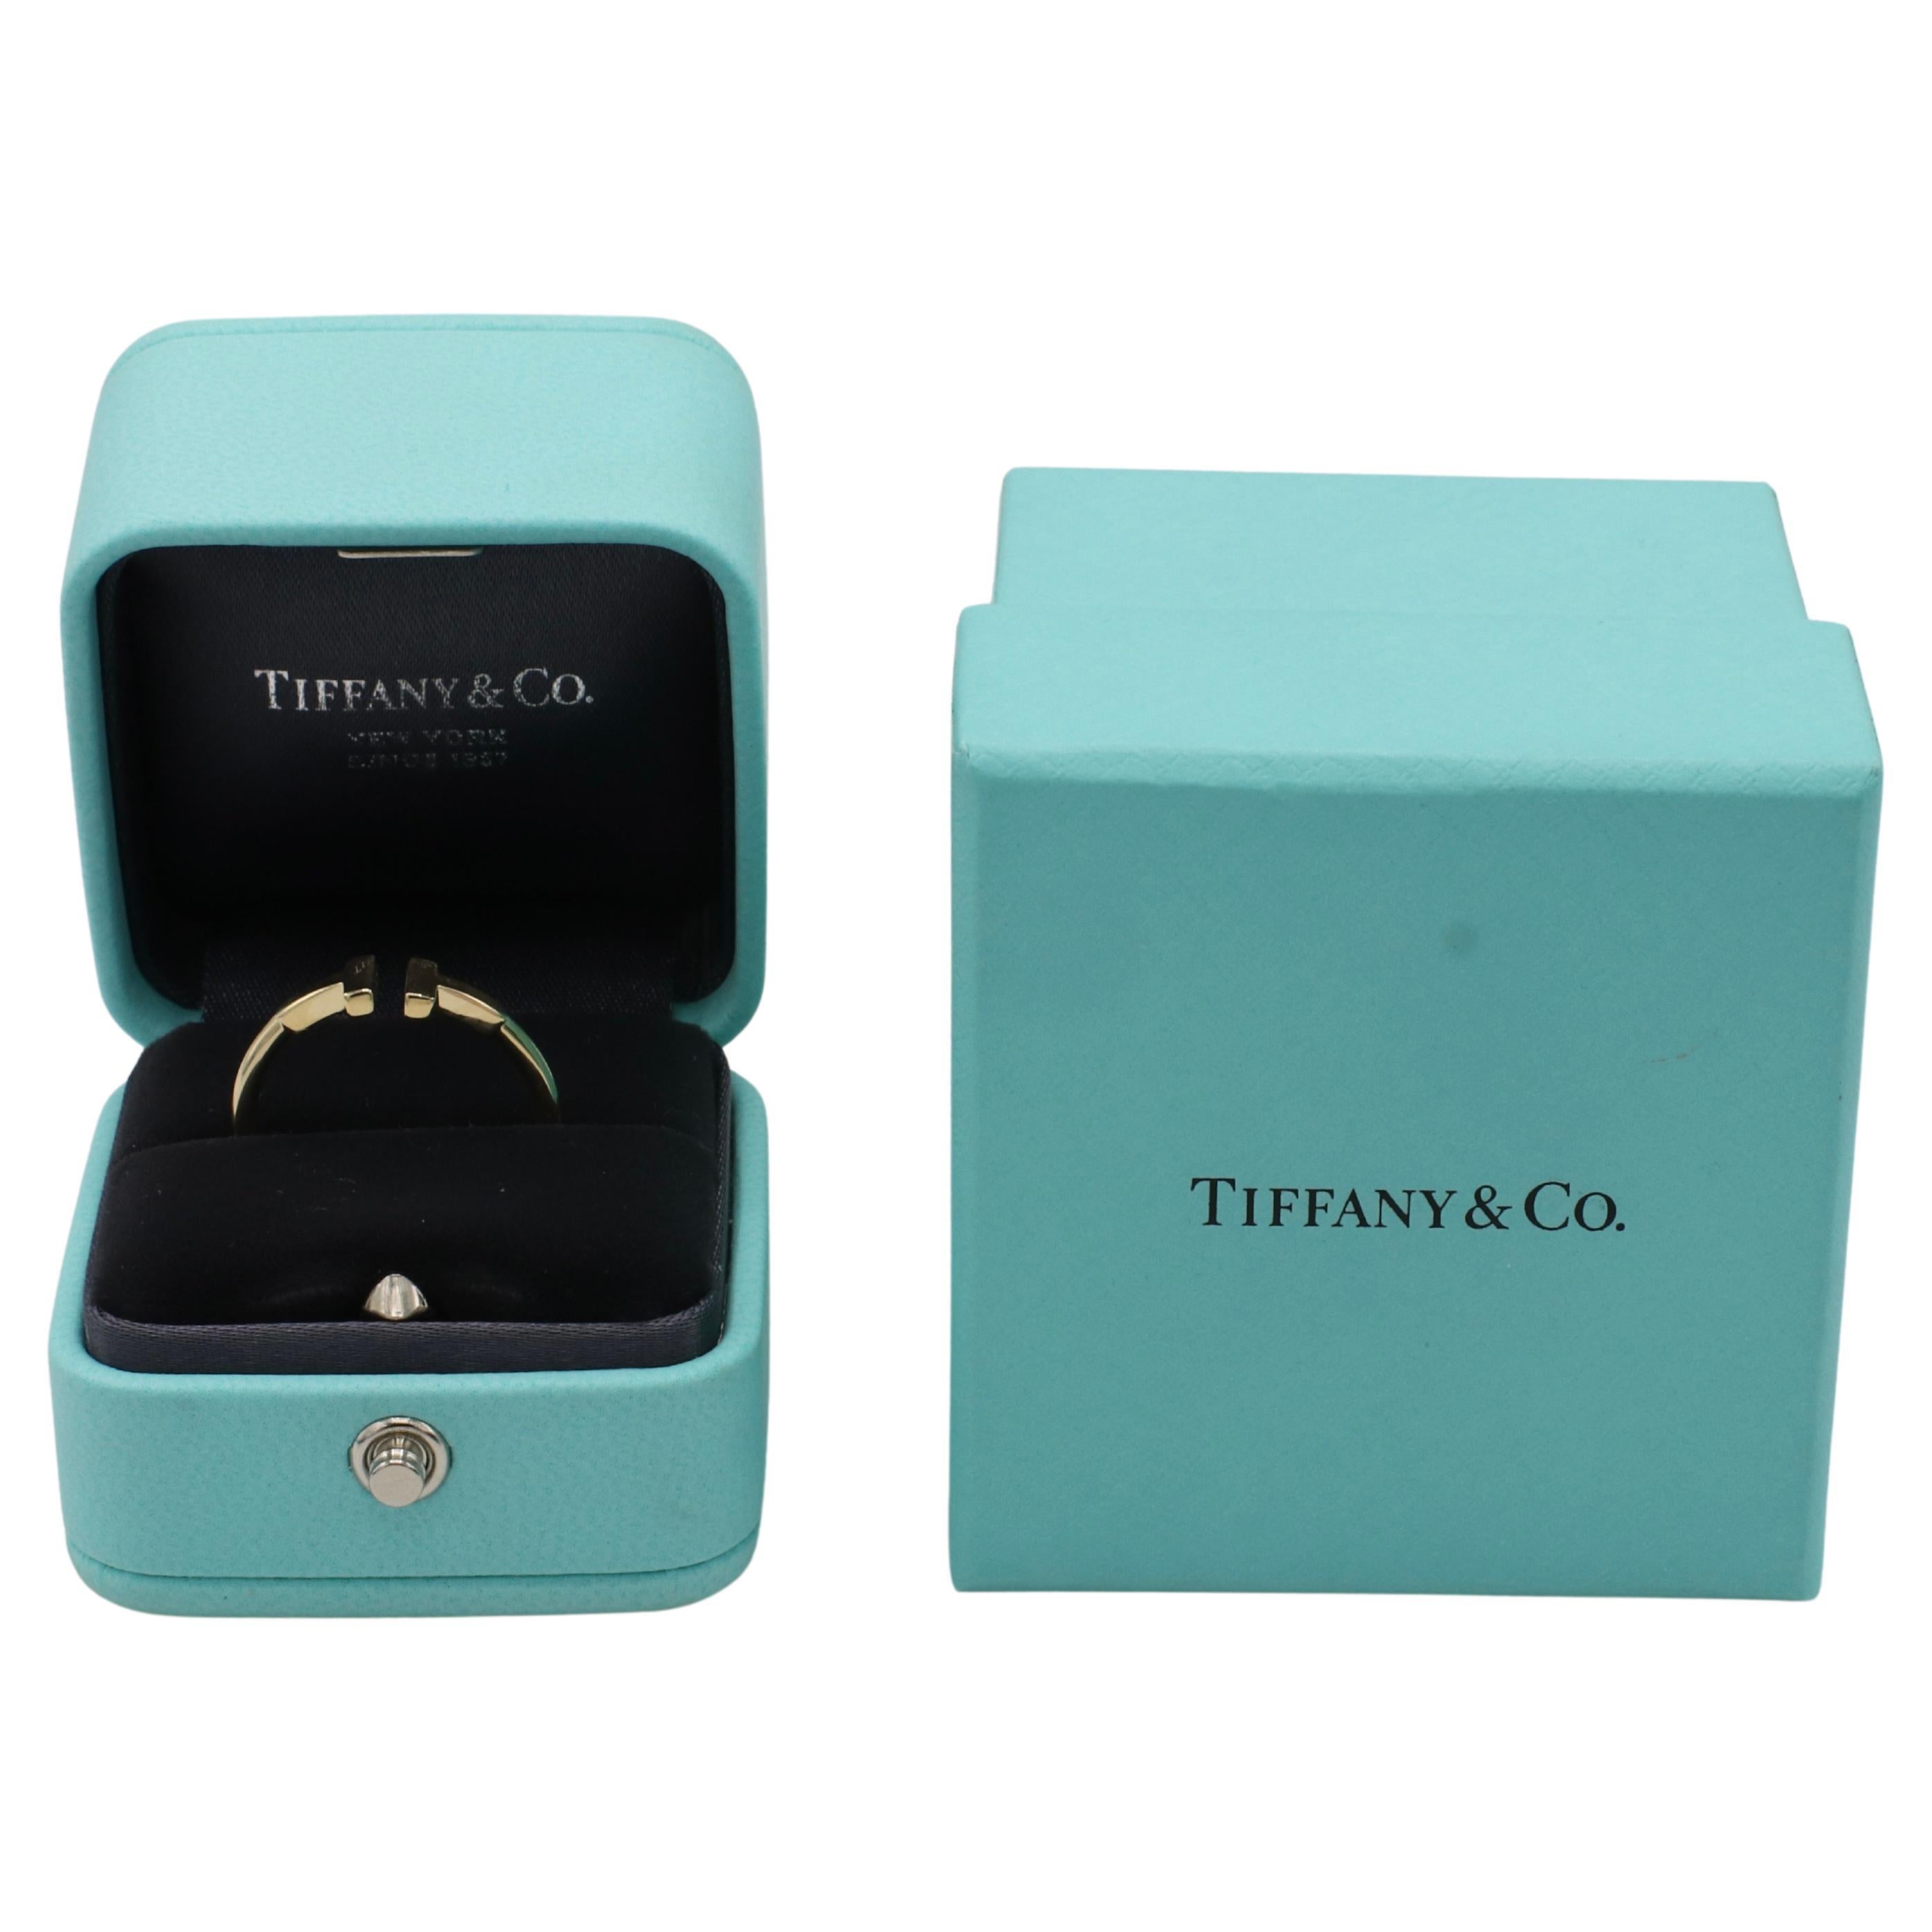 Tiffany & Co. Tiffany T Wire Ring 18 Karat Yellow Gold 
Metal: 18k yellow gold
Weight: 3.41 grams
Size: 8.5 (US)
Band width: 1.5mm
Retail: $1,250 USD
